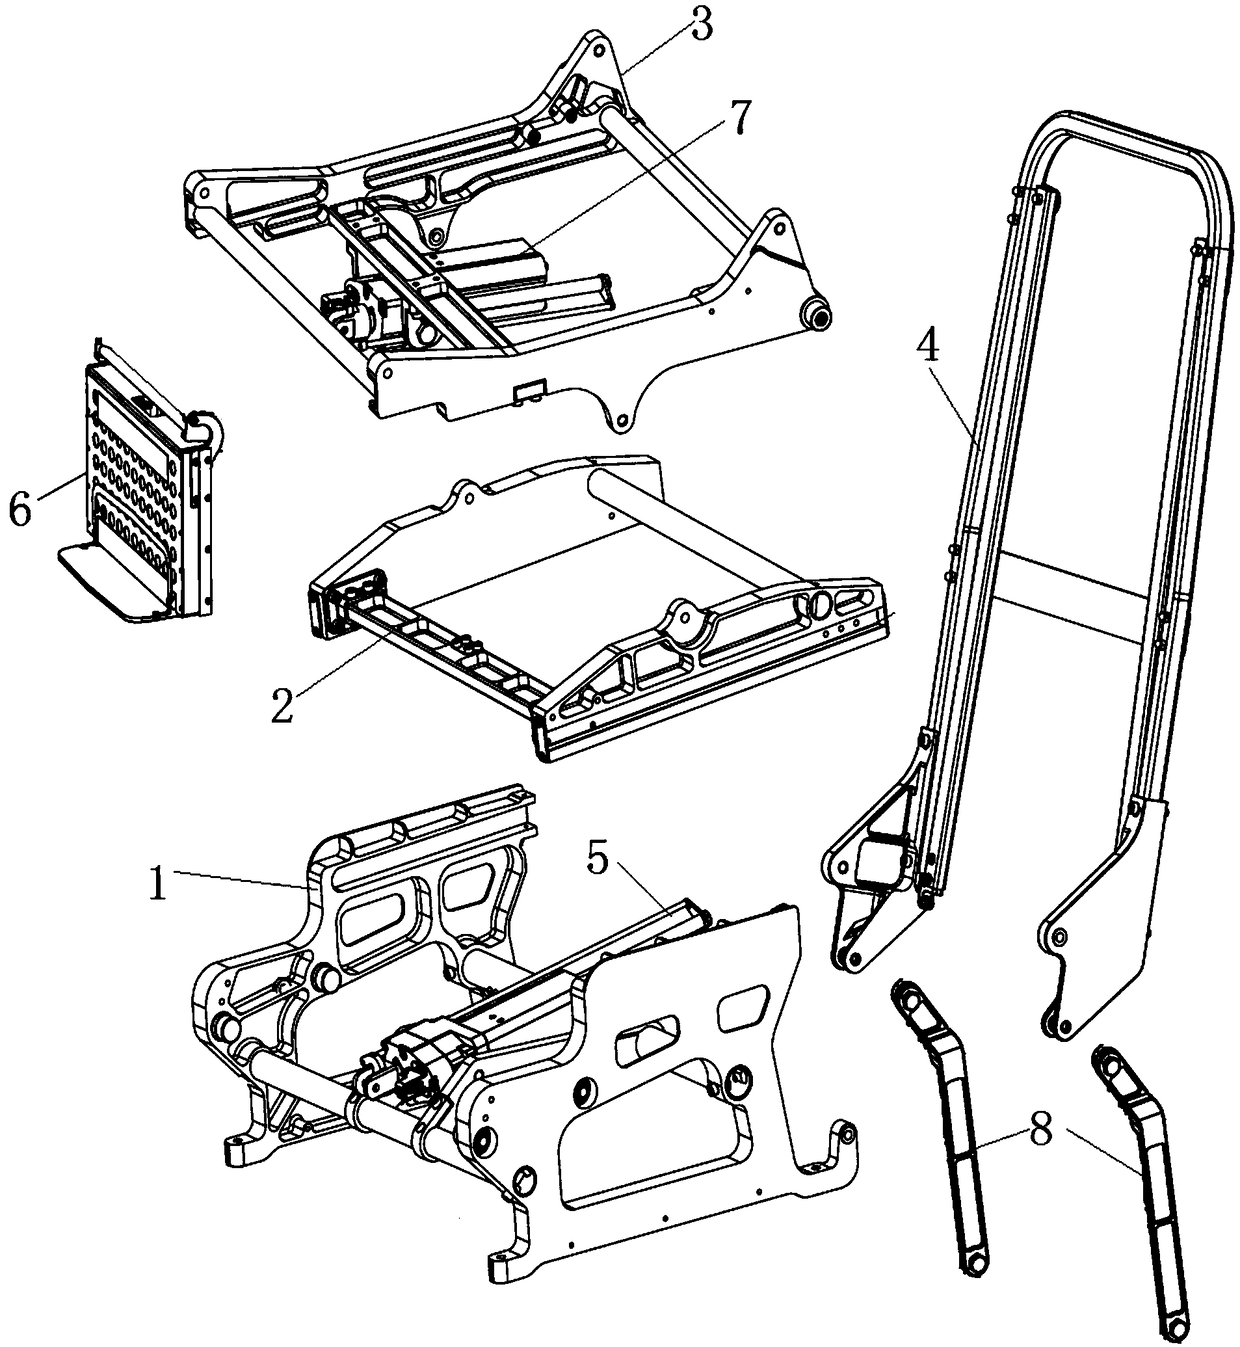 Frame structure of full-flat air seat